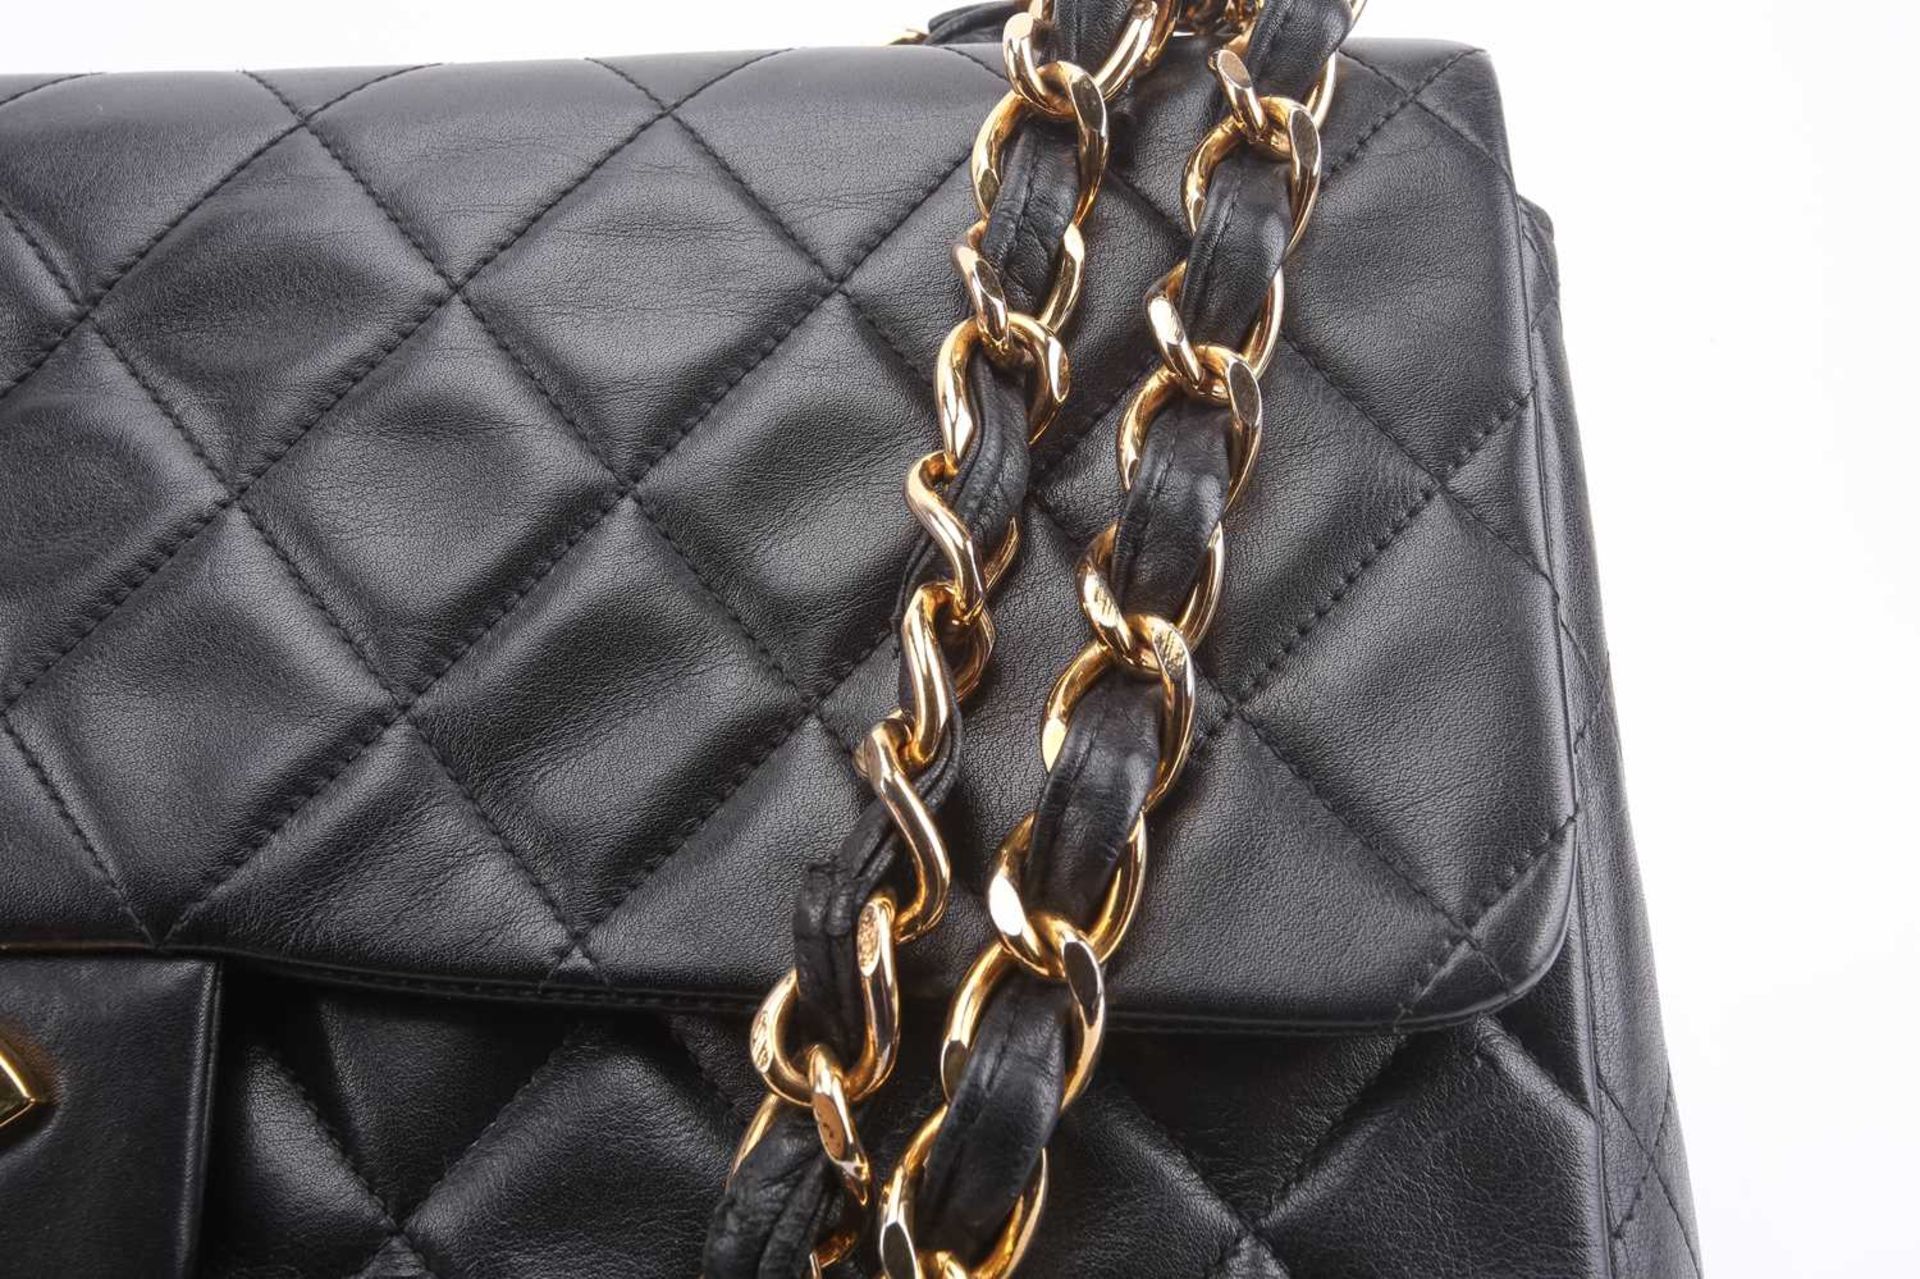 Chanel - a jumbo XL single flap bag in black diamond-quilted lambskin leather, circa 1991, - Image 13 of 15